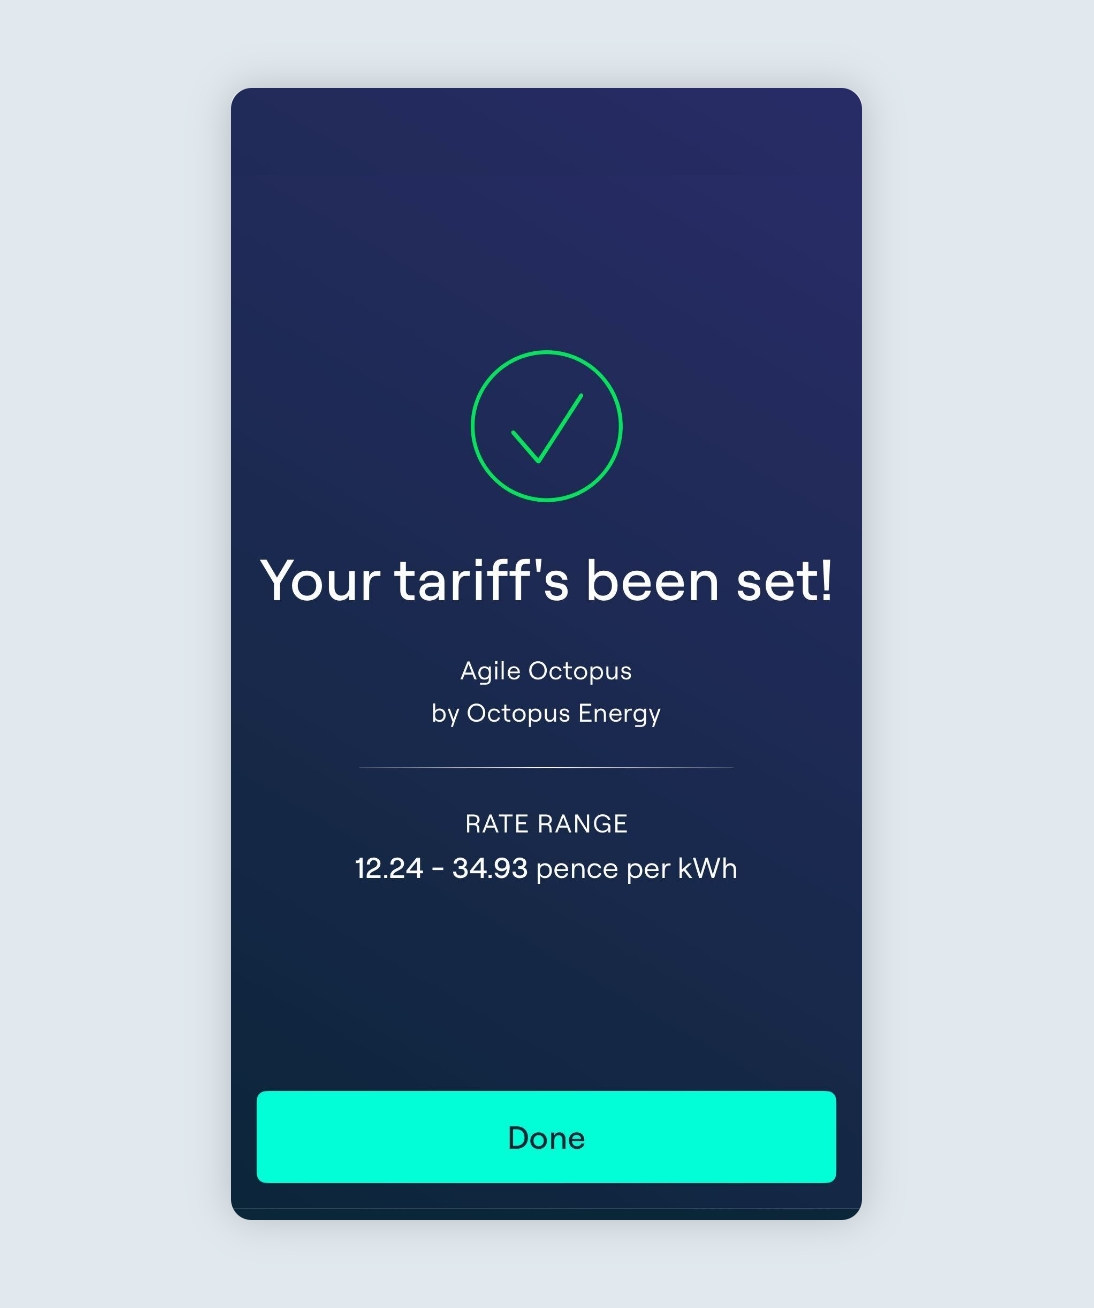 Tariff switch complete confirmation page